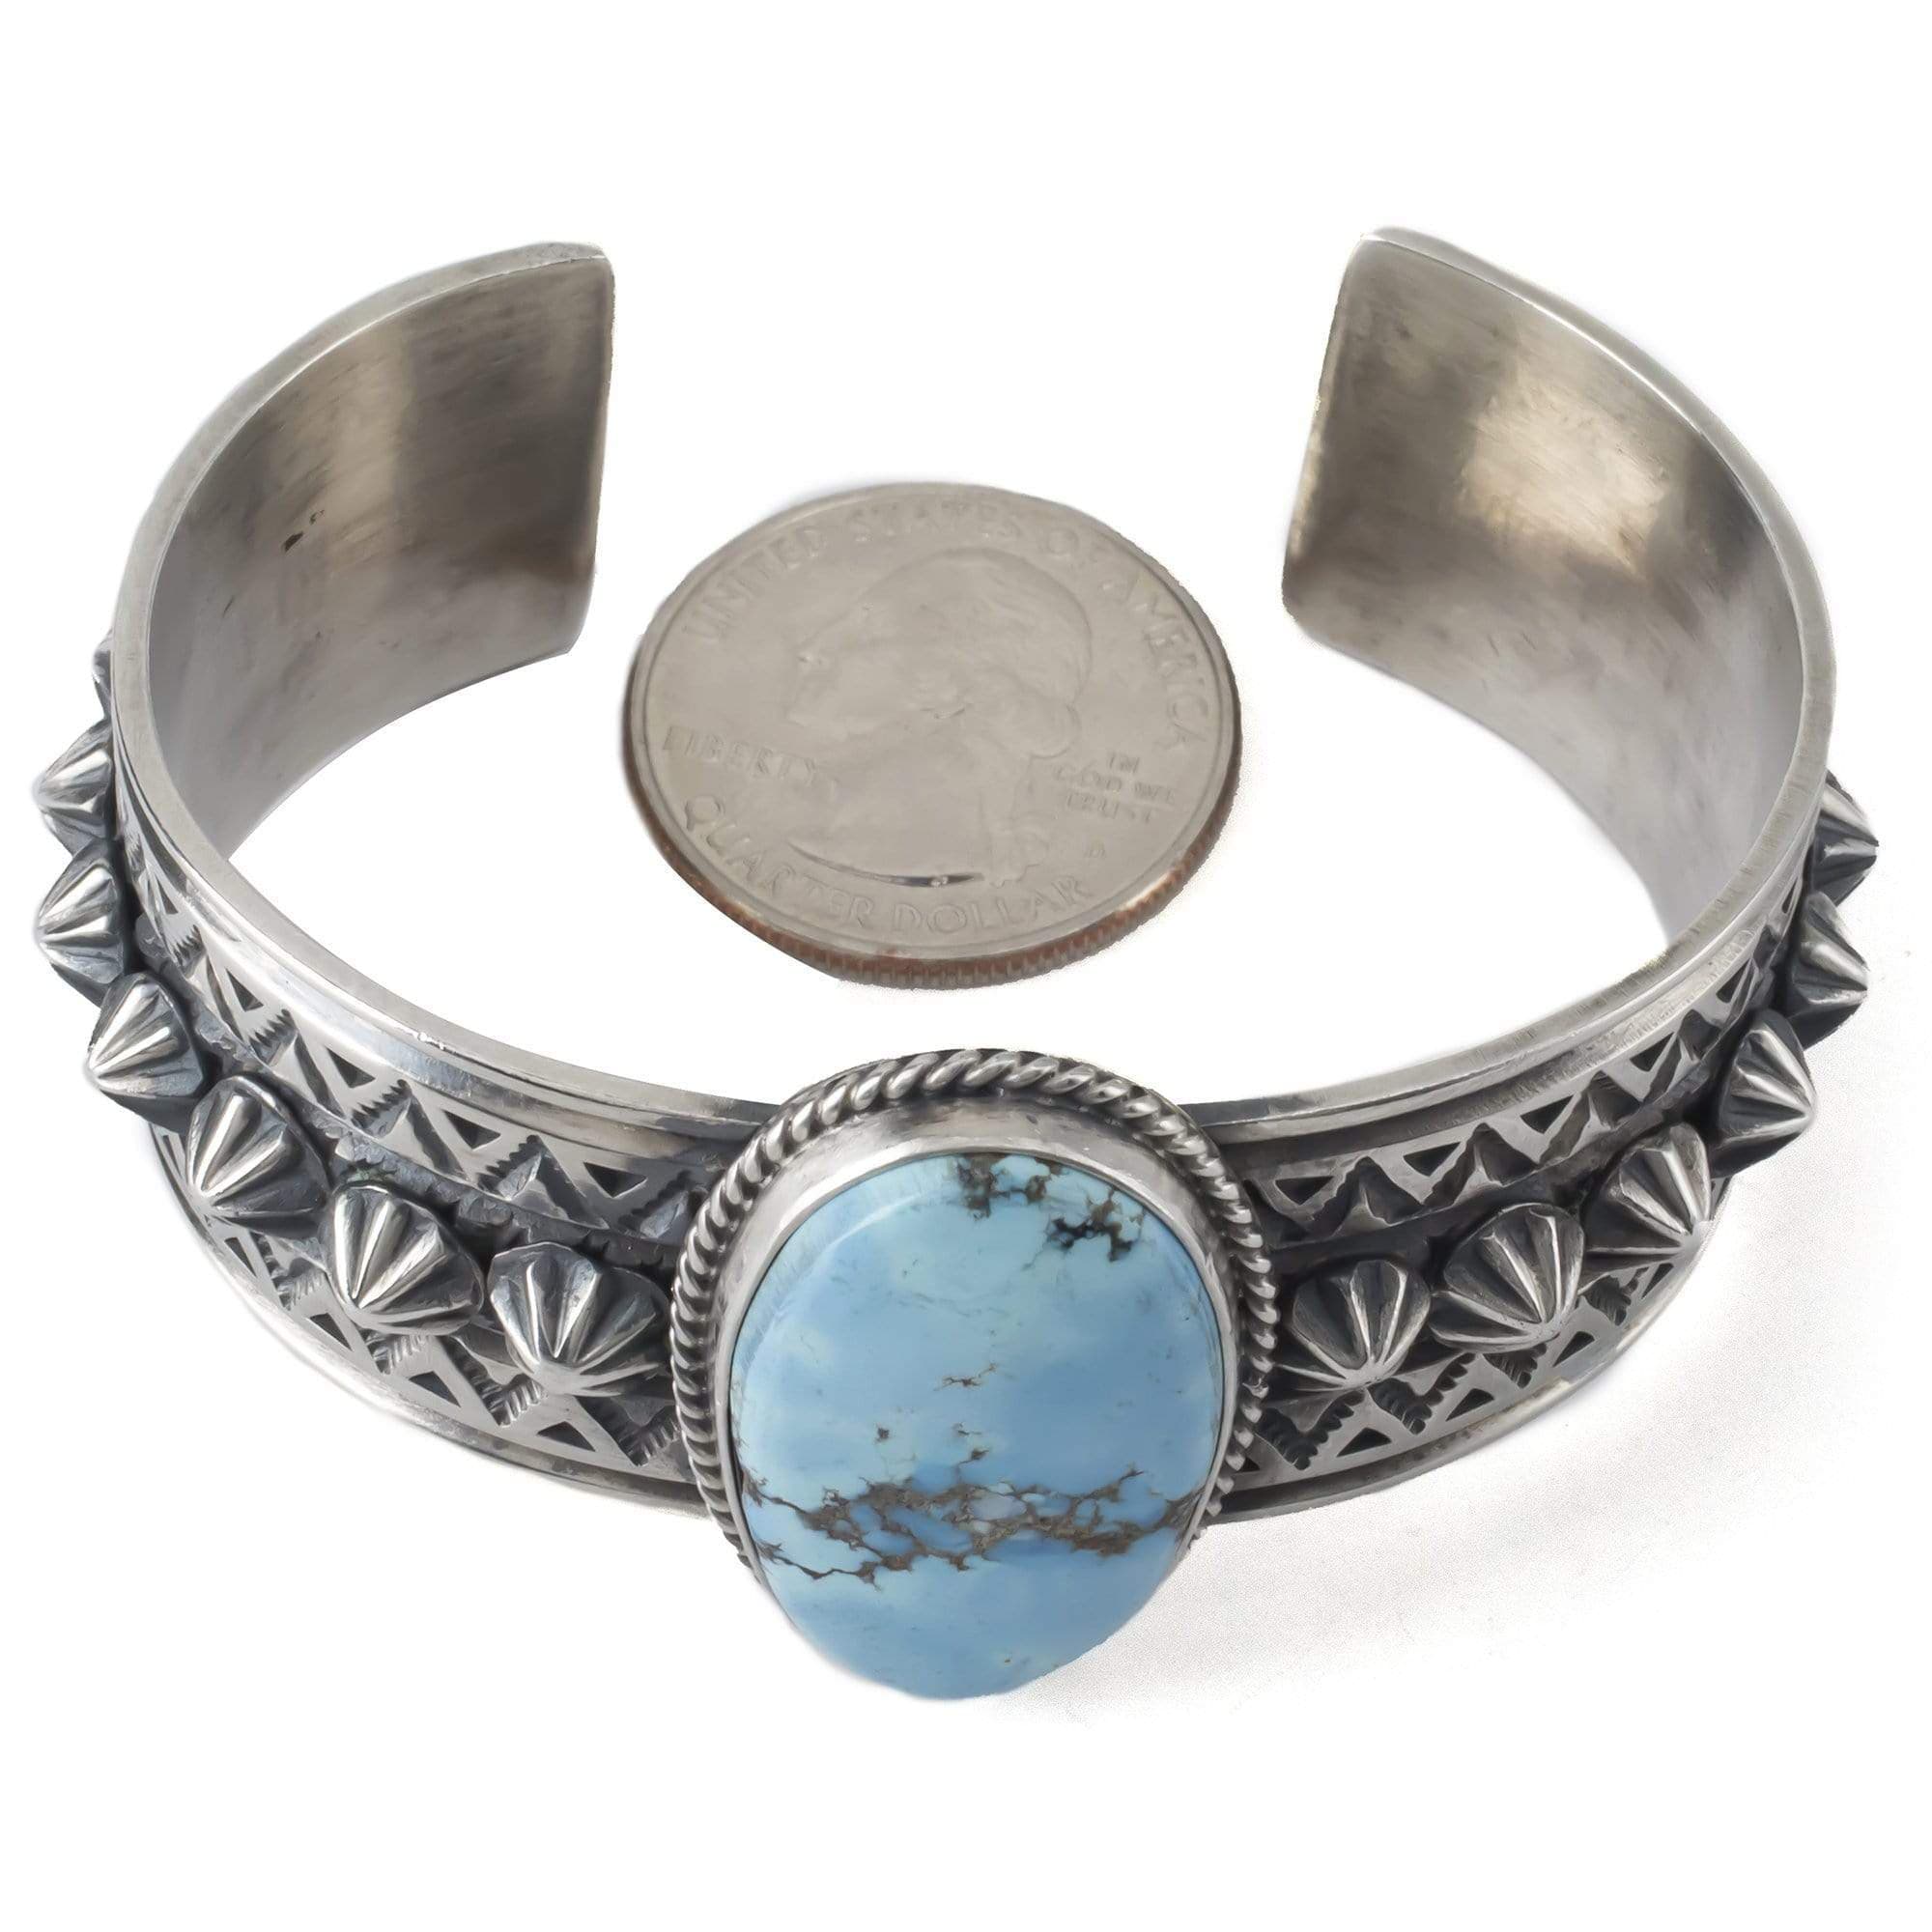 Kalifano Native American Jewelry Donovan Cadman Golden Hills Turquoise Native American Made 925 Sterling Silver Cuff NAB2700.002